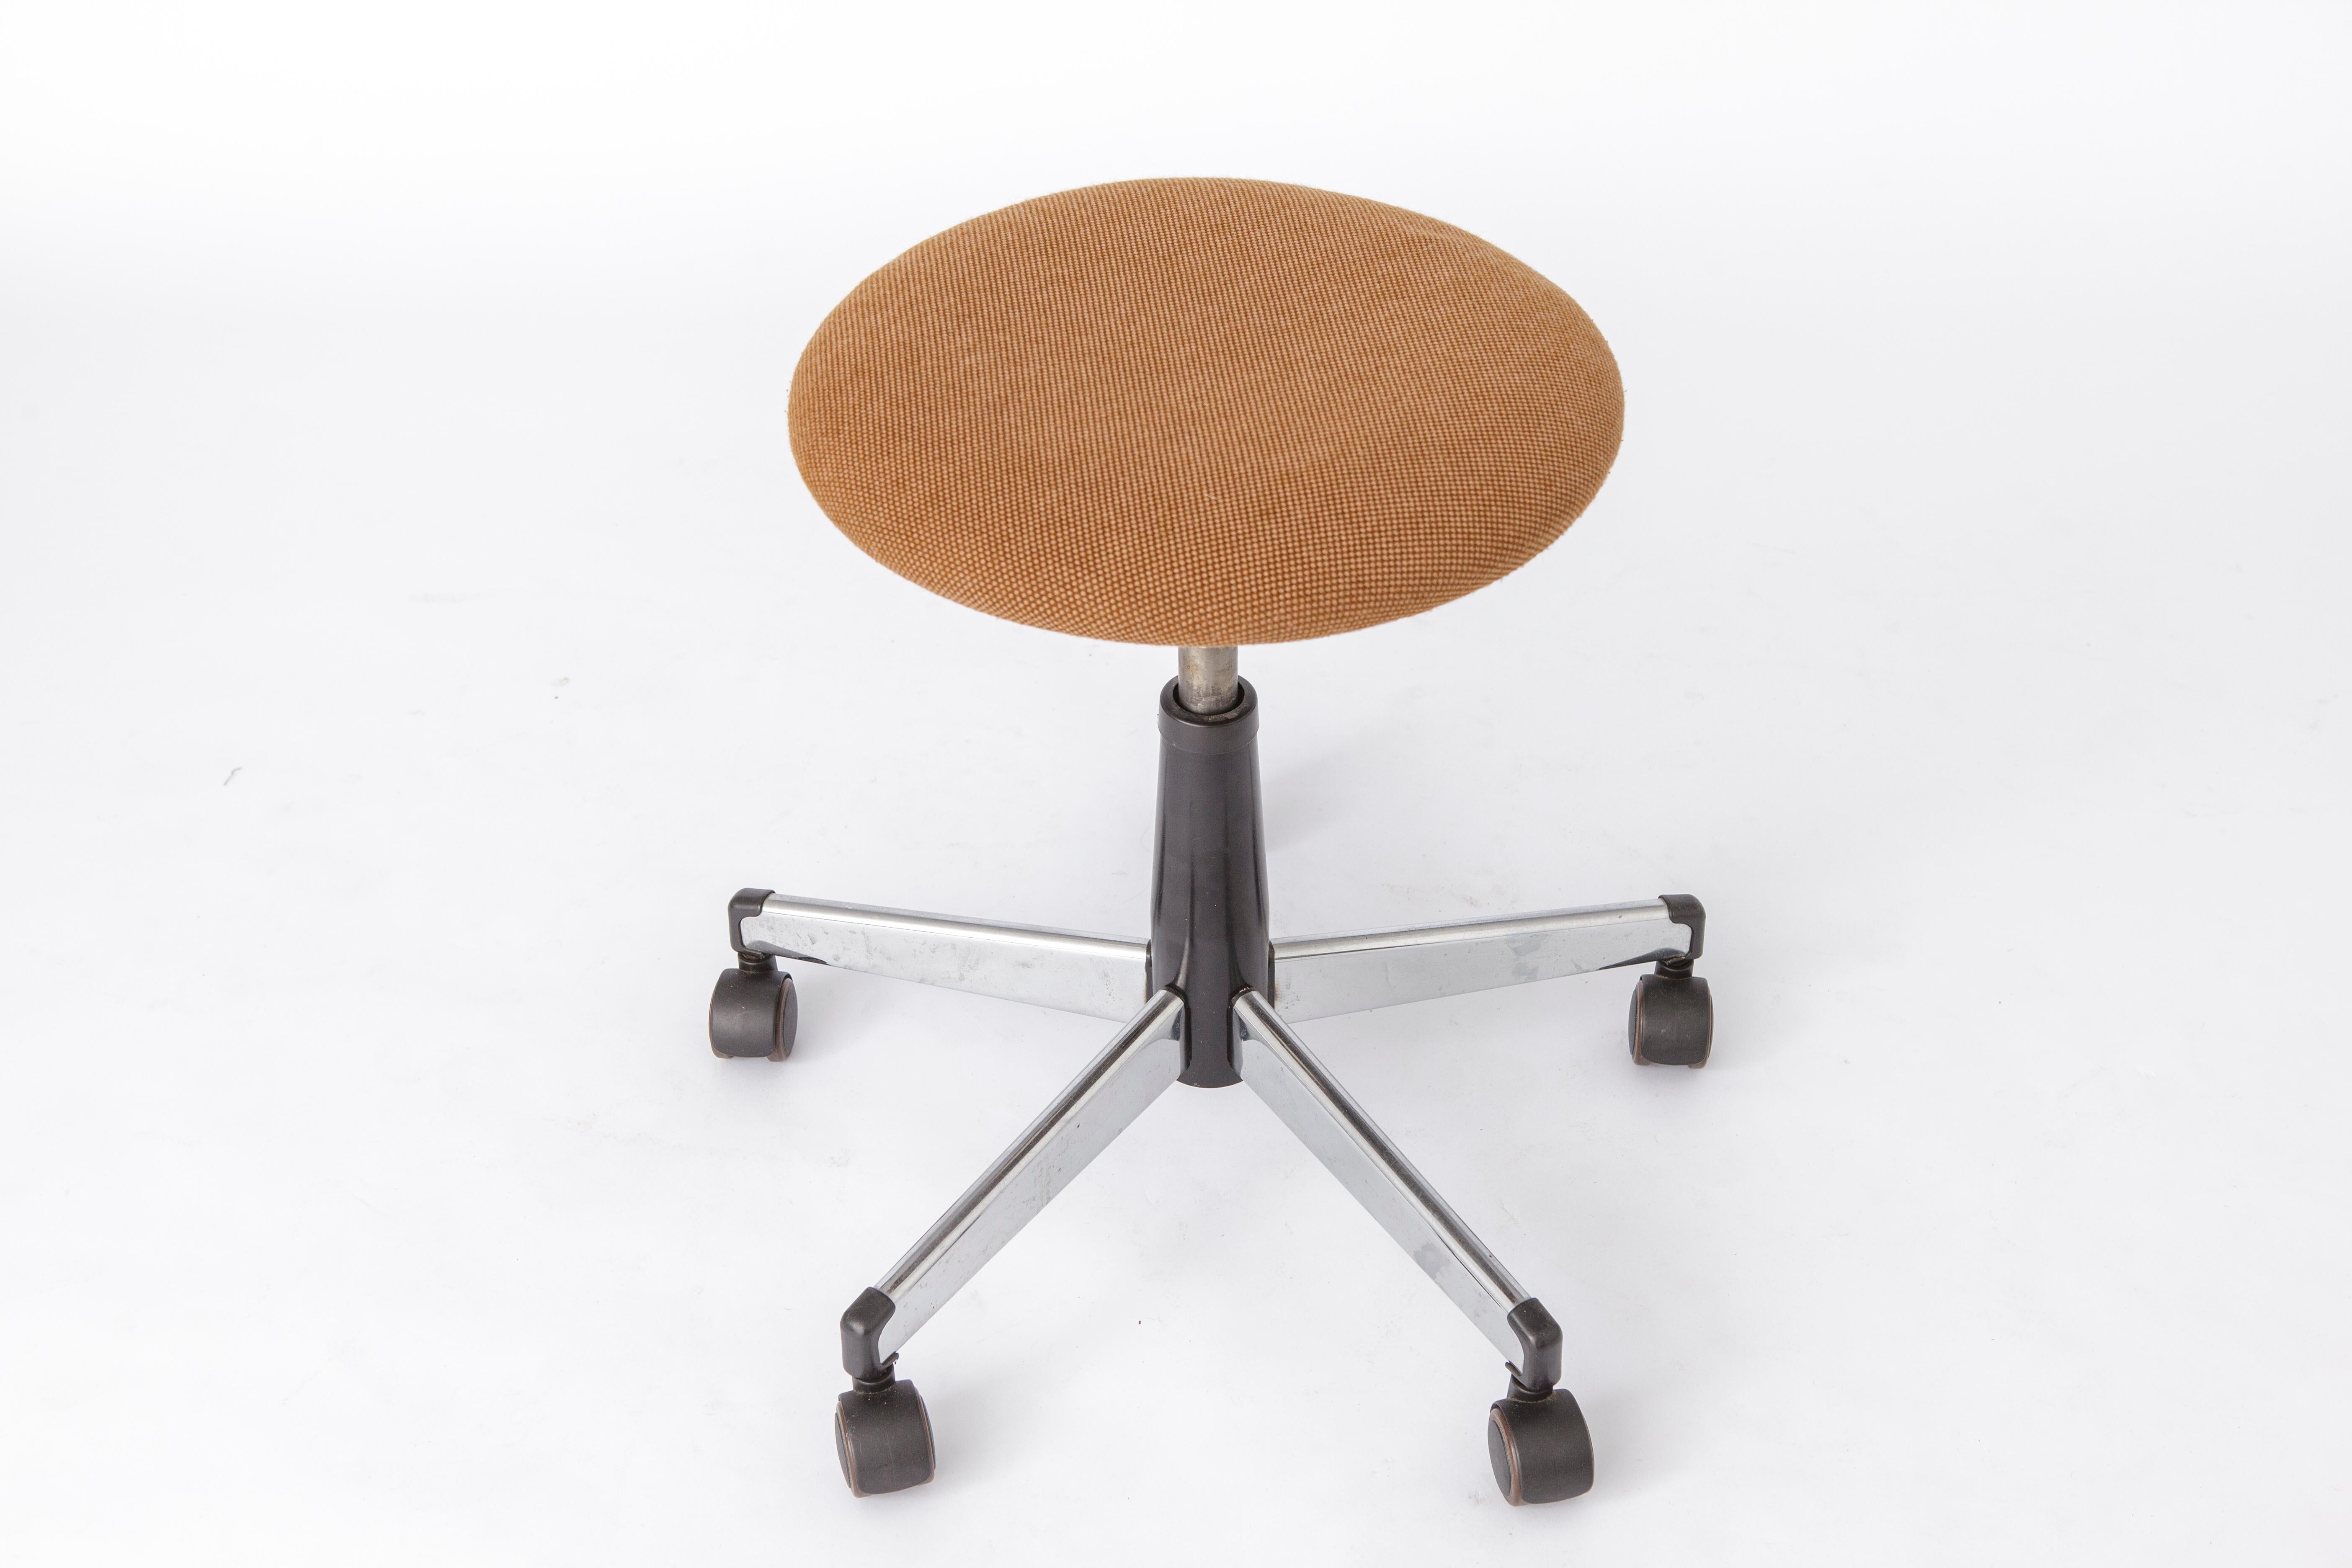 Adjustable vintage stool from the 1960s. 
Manufacturer: Martin Stoll GmbH, Germany. 

Metal frame and wooden seat. Covered with brown textile. Original cover.
Good condition, the adjustment mechanism works perfectly.